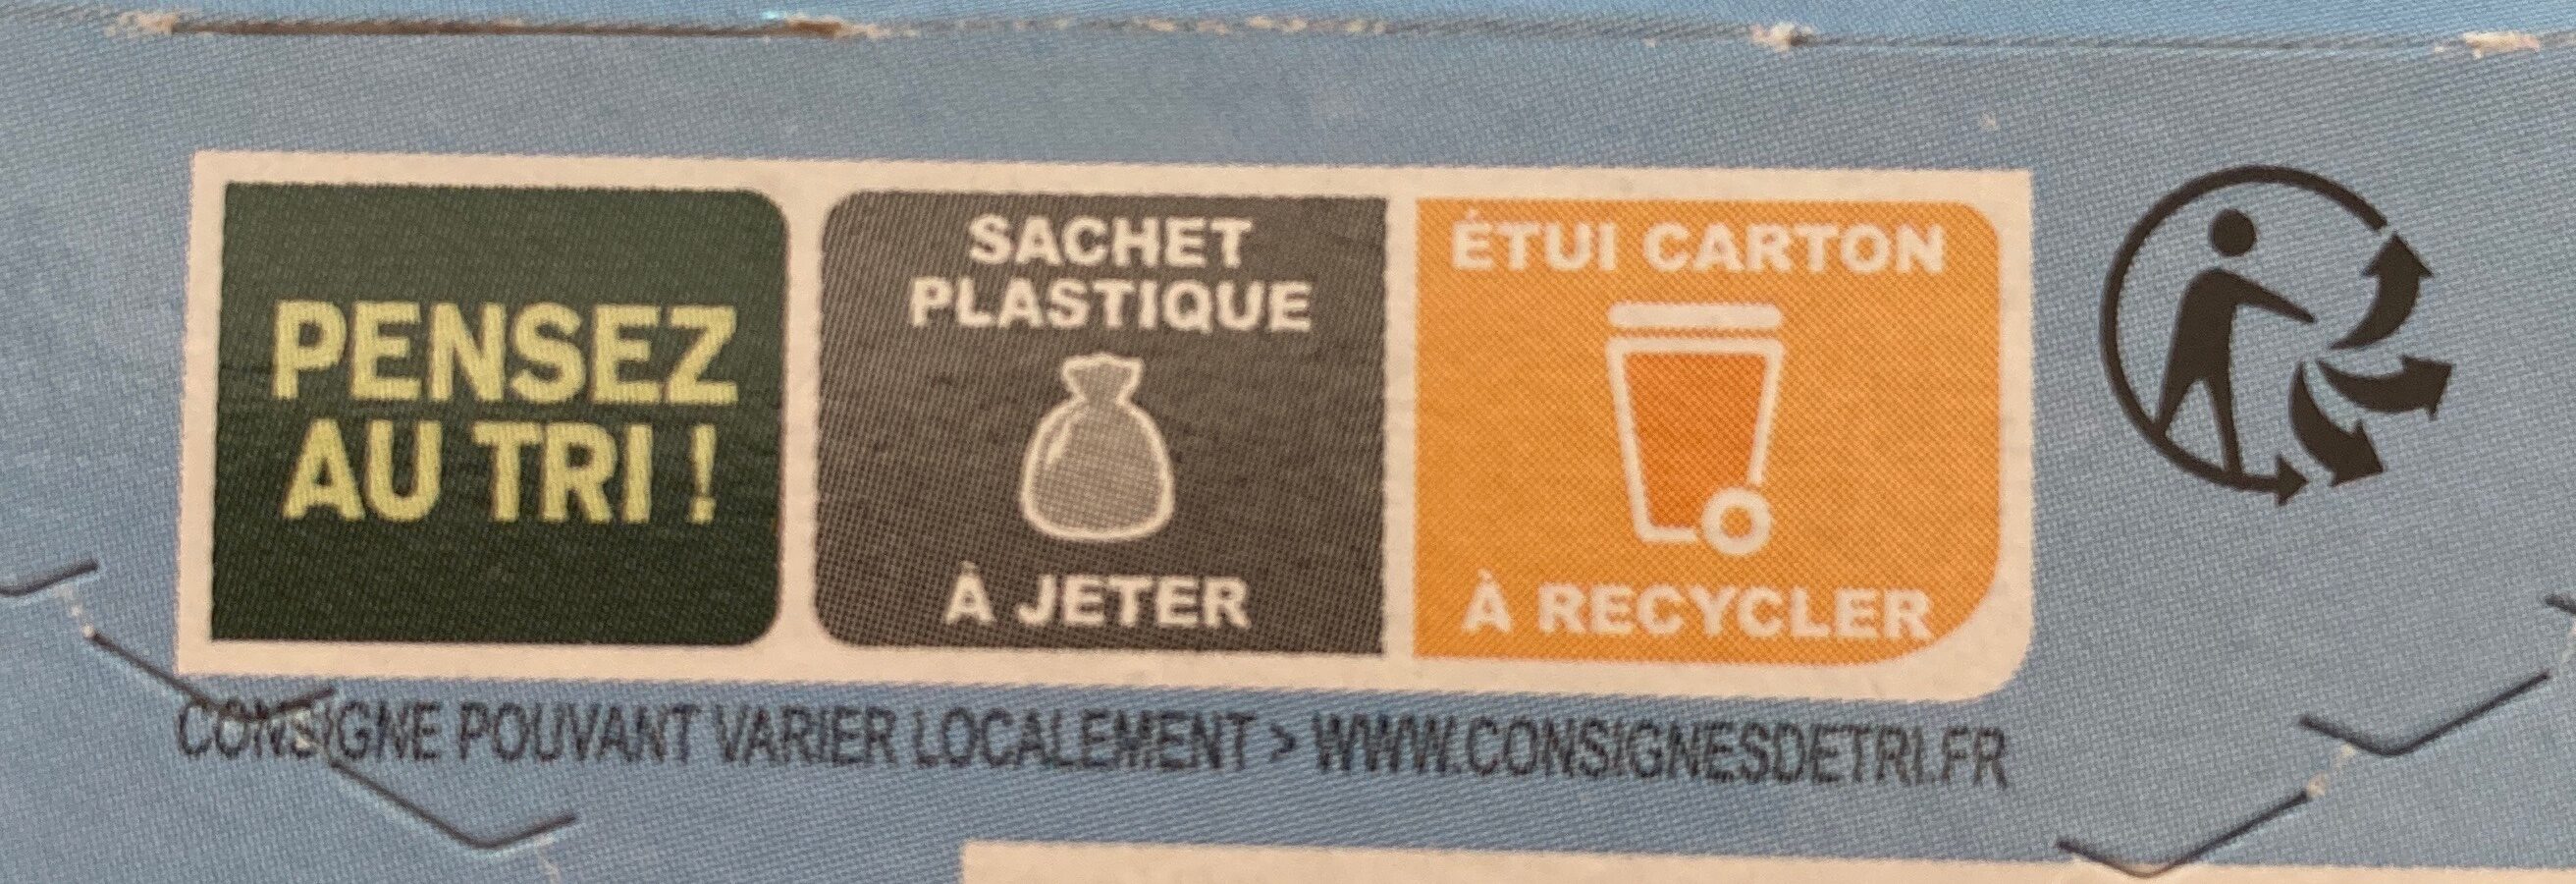 Sablé Nature sans sucres - Recycling instructions and/or packaging information